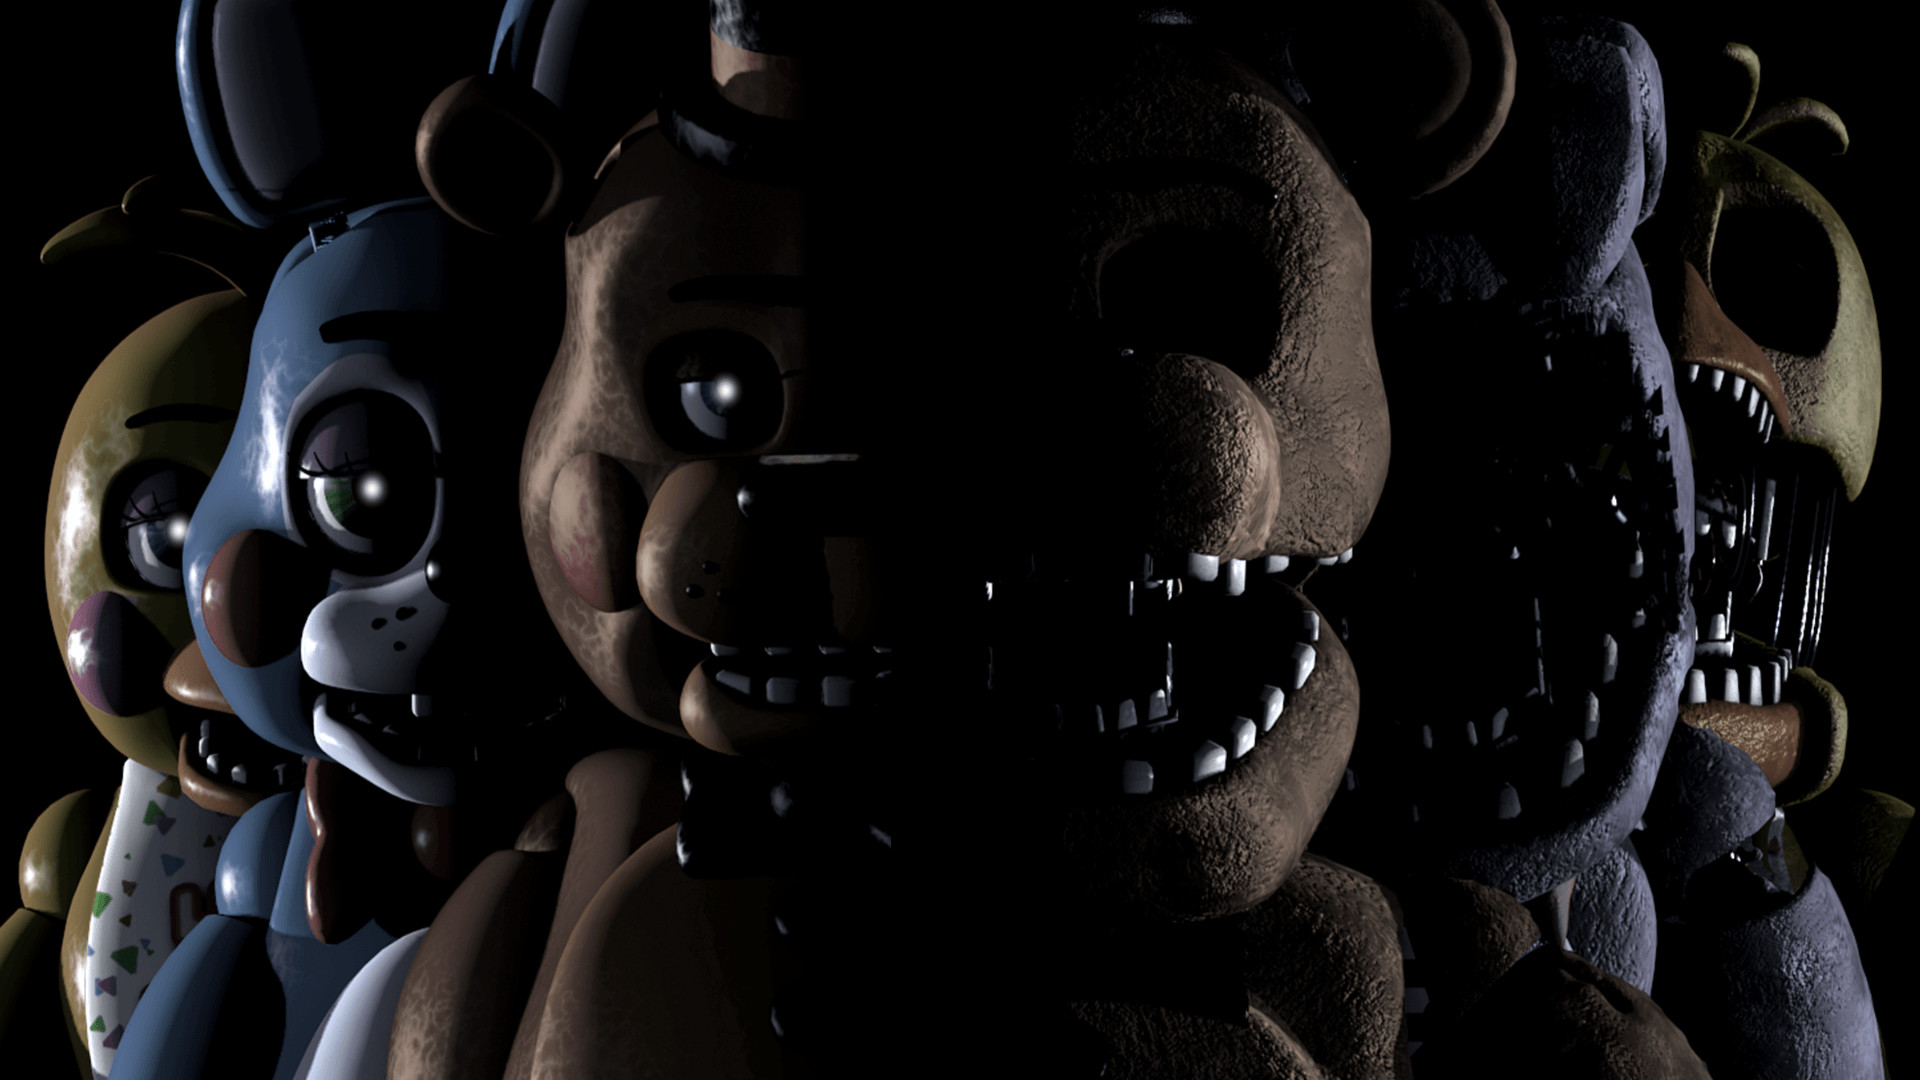 Five Nights at Freddy's Wallpapers – Album on Imgur